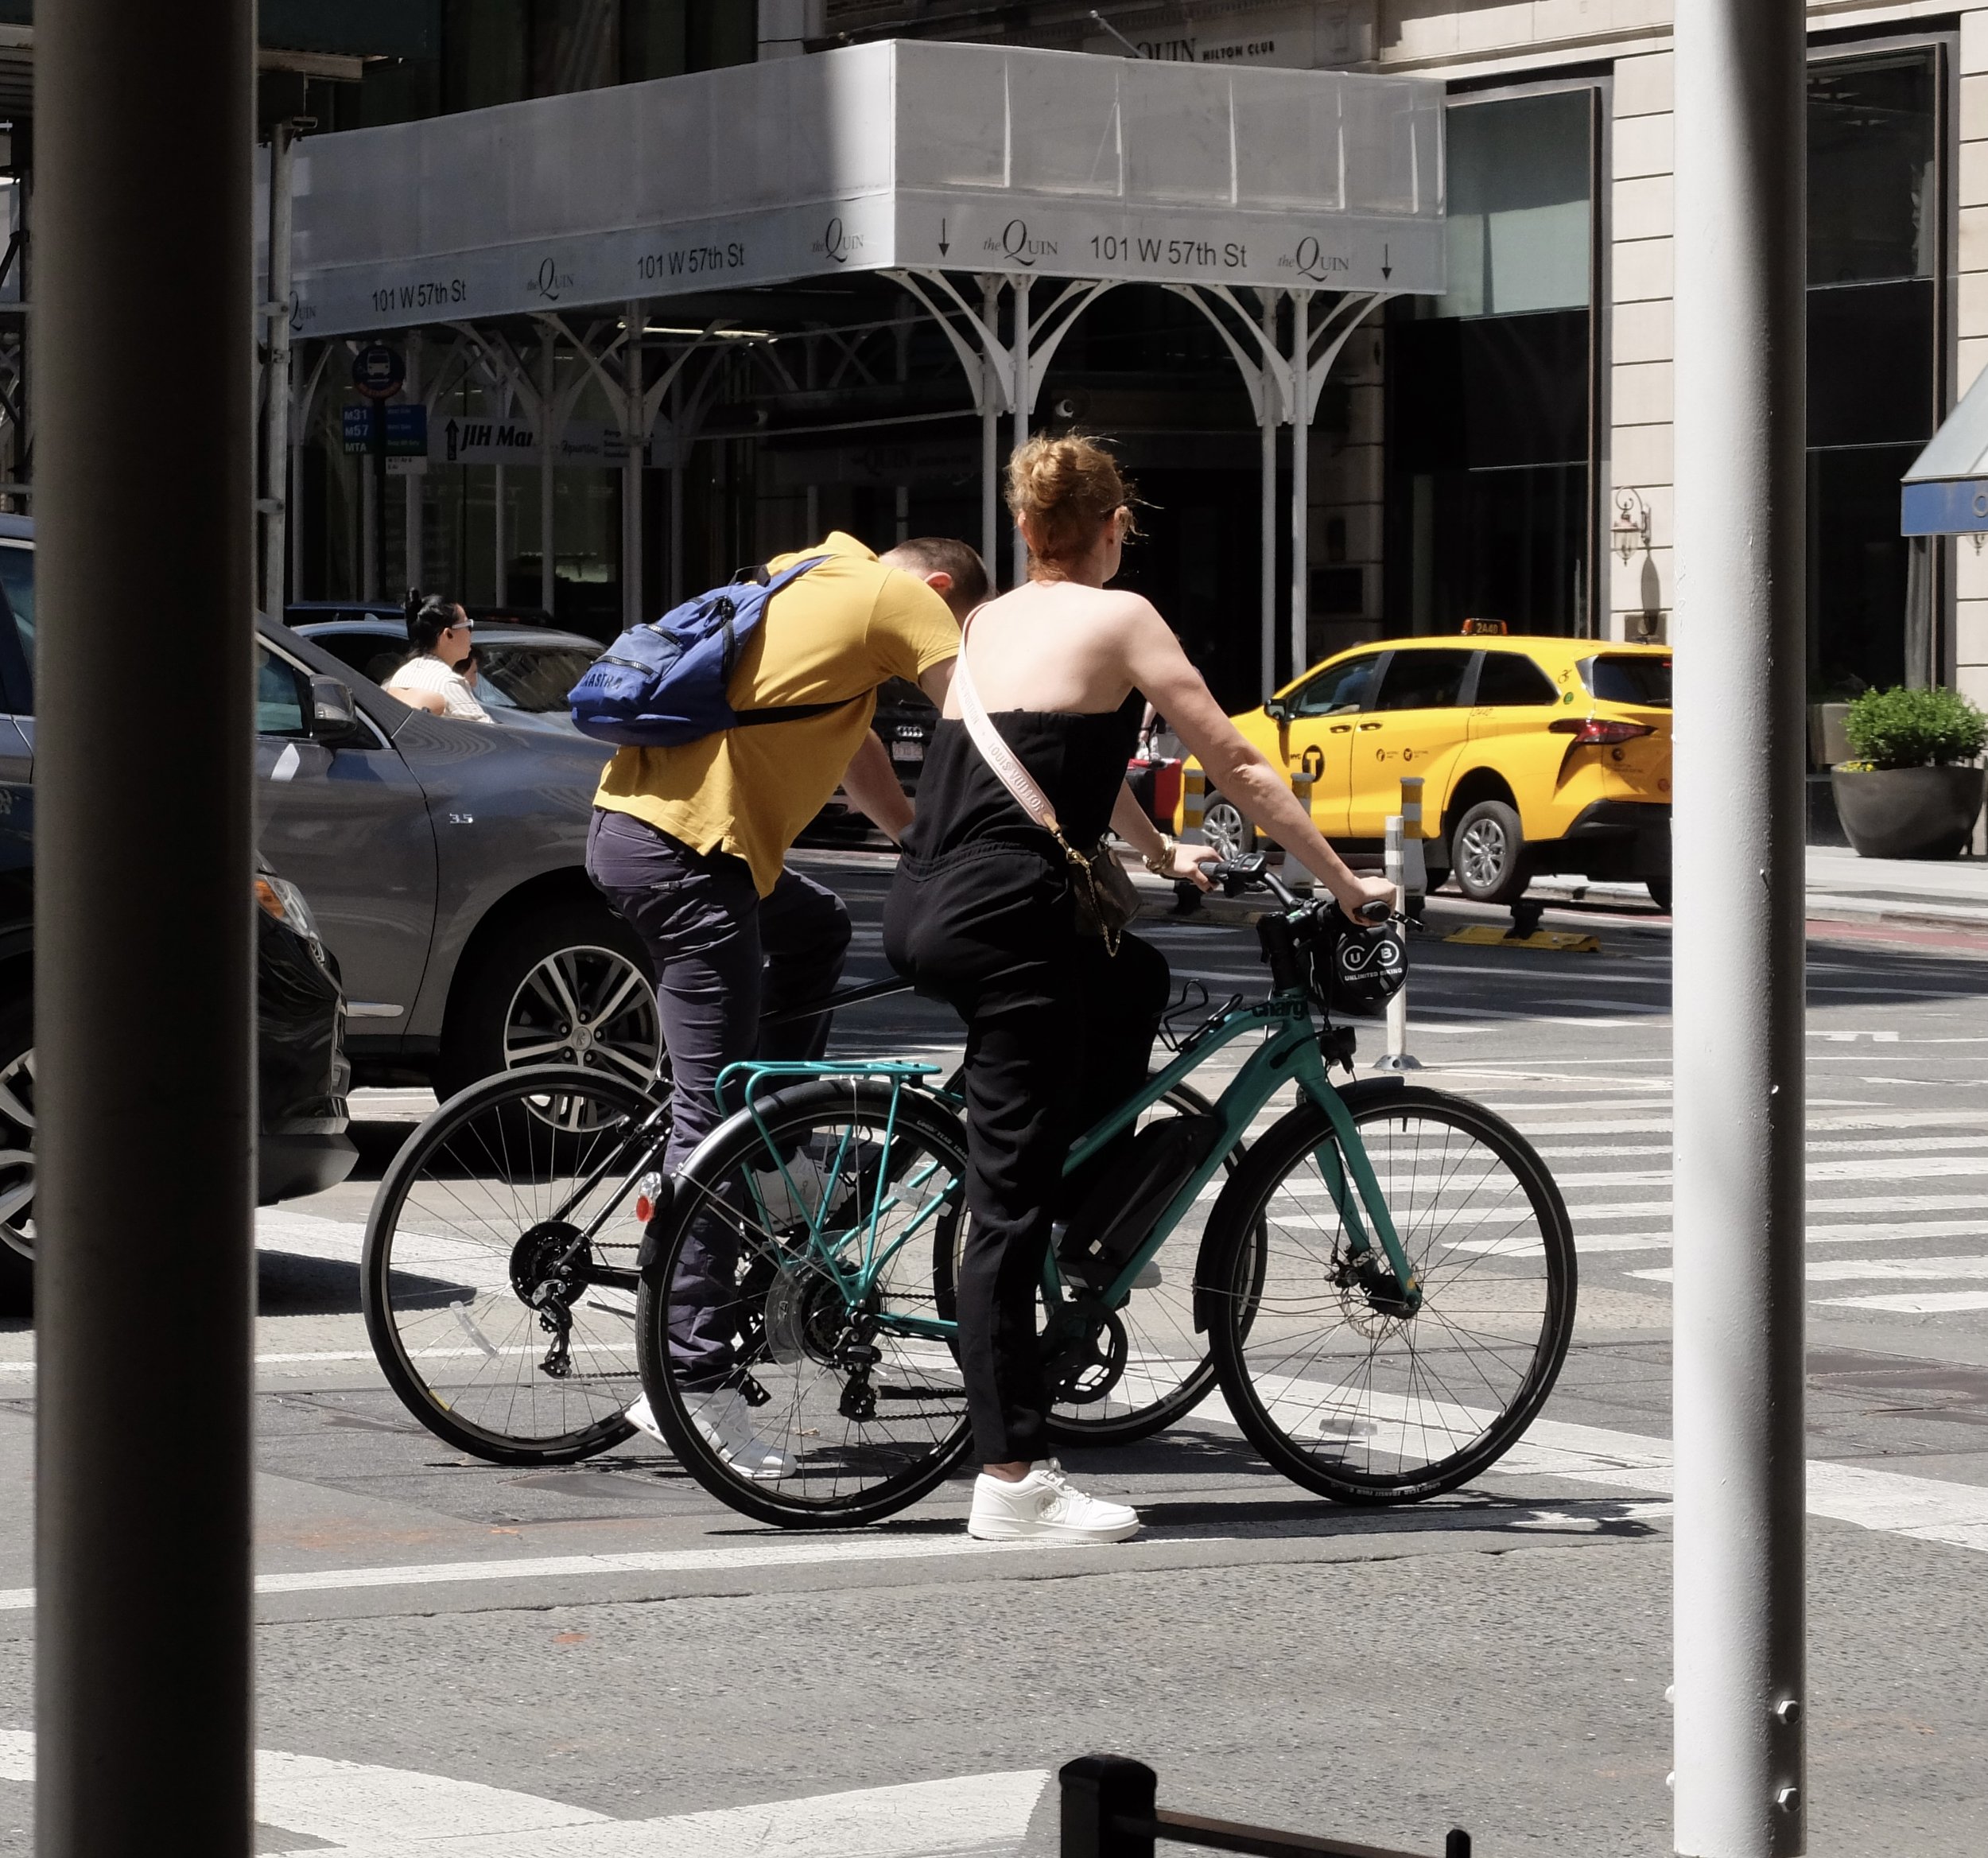  Based on their bicycles, these are locals, without helmets.  The bicycle rental places were disgorging many tourists, into the crowded area leading into Central Park.  Most of these riders had on no helmets &amp; appeared to be novices regarding rid